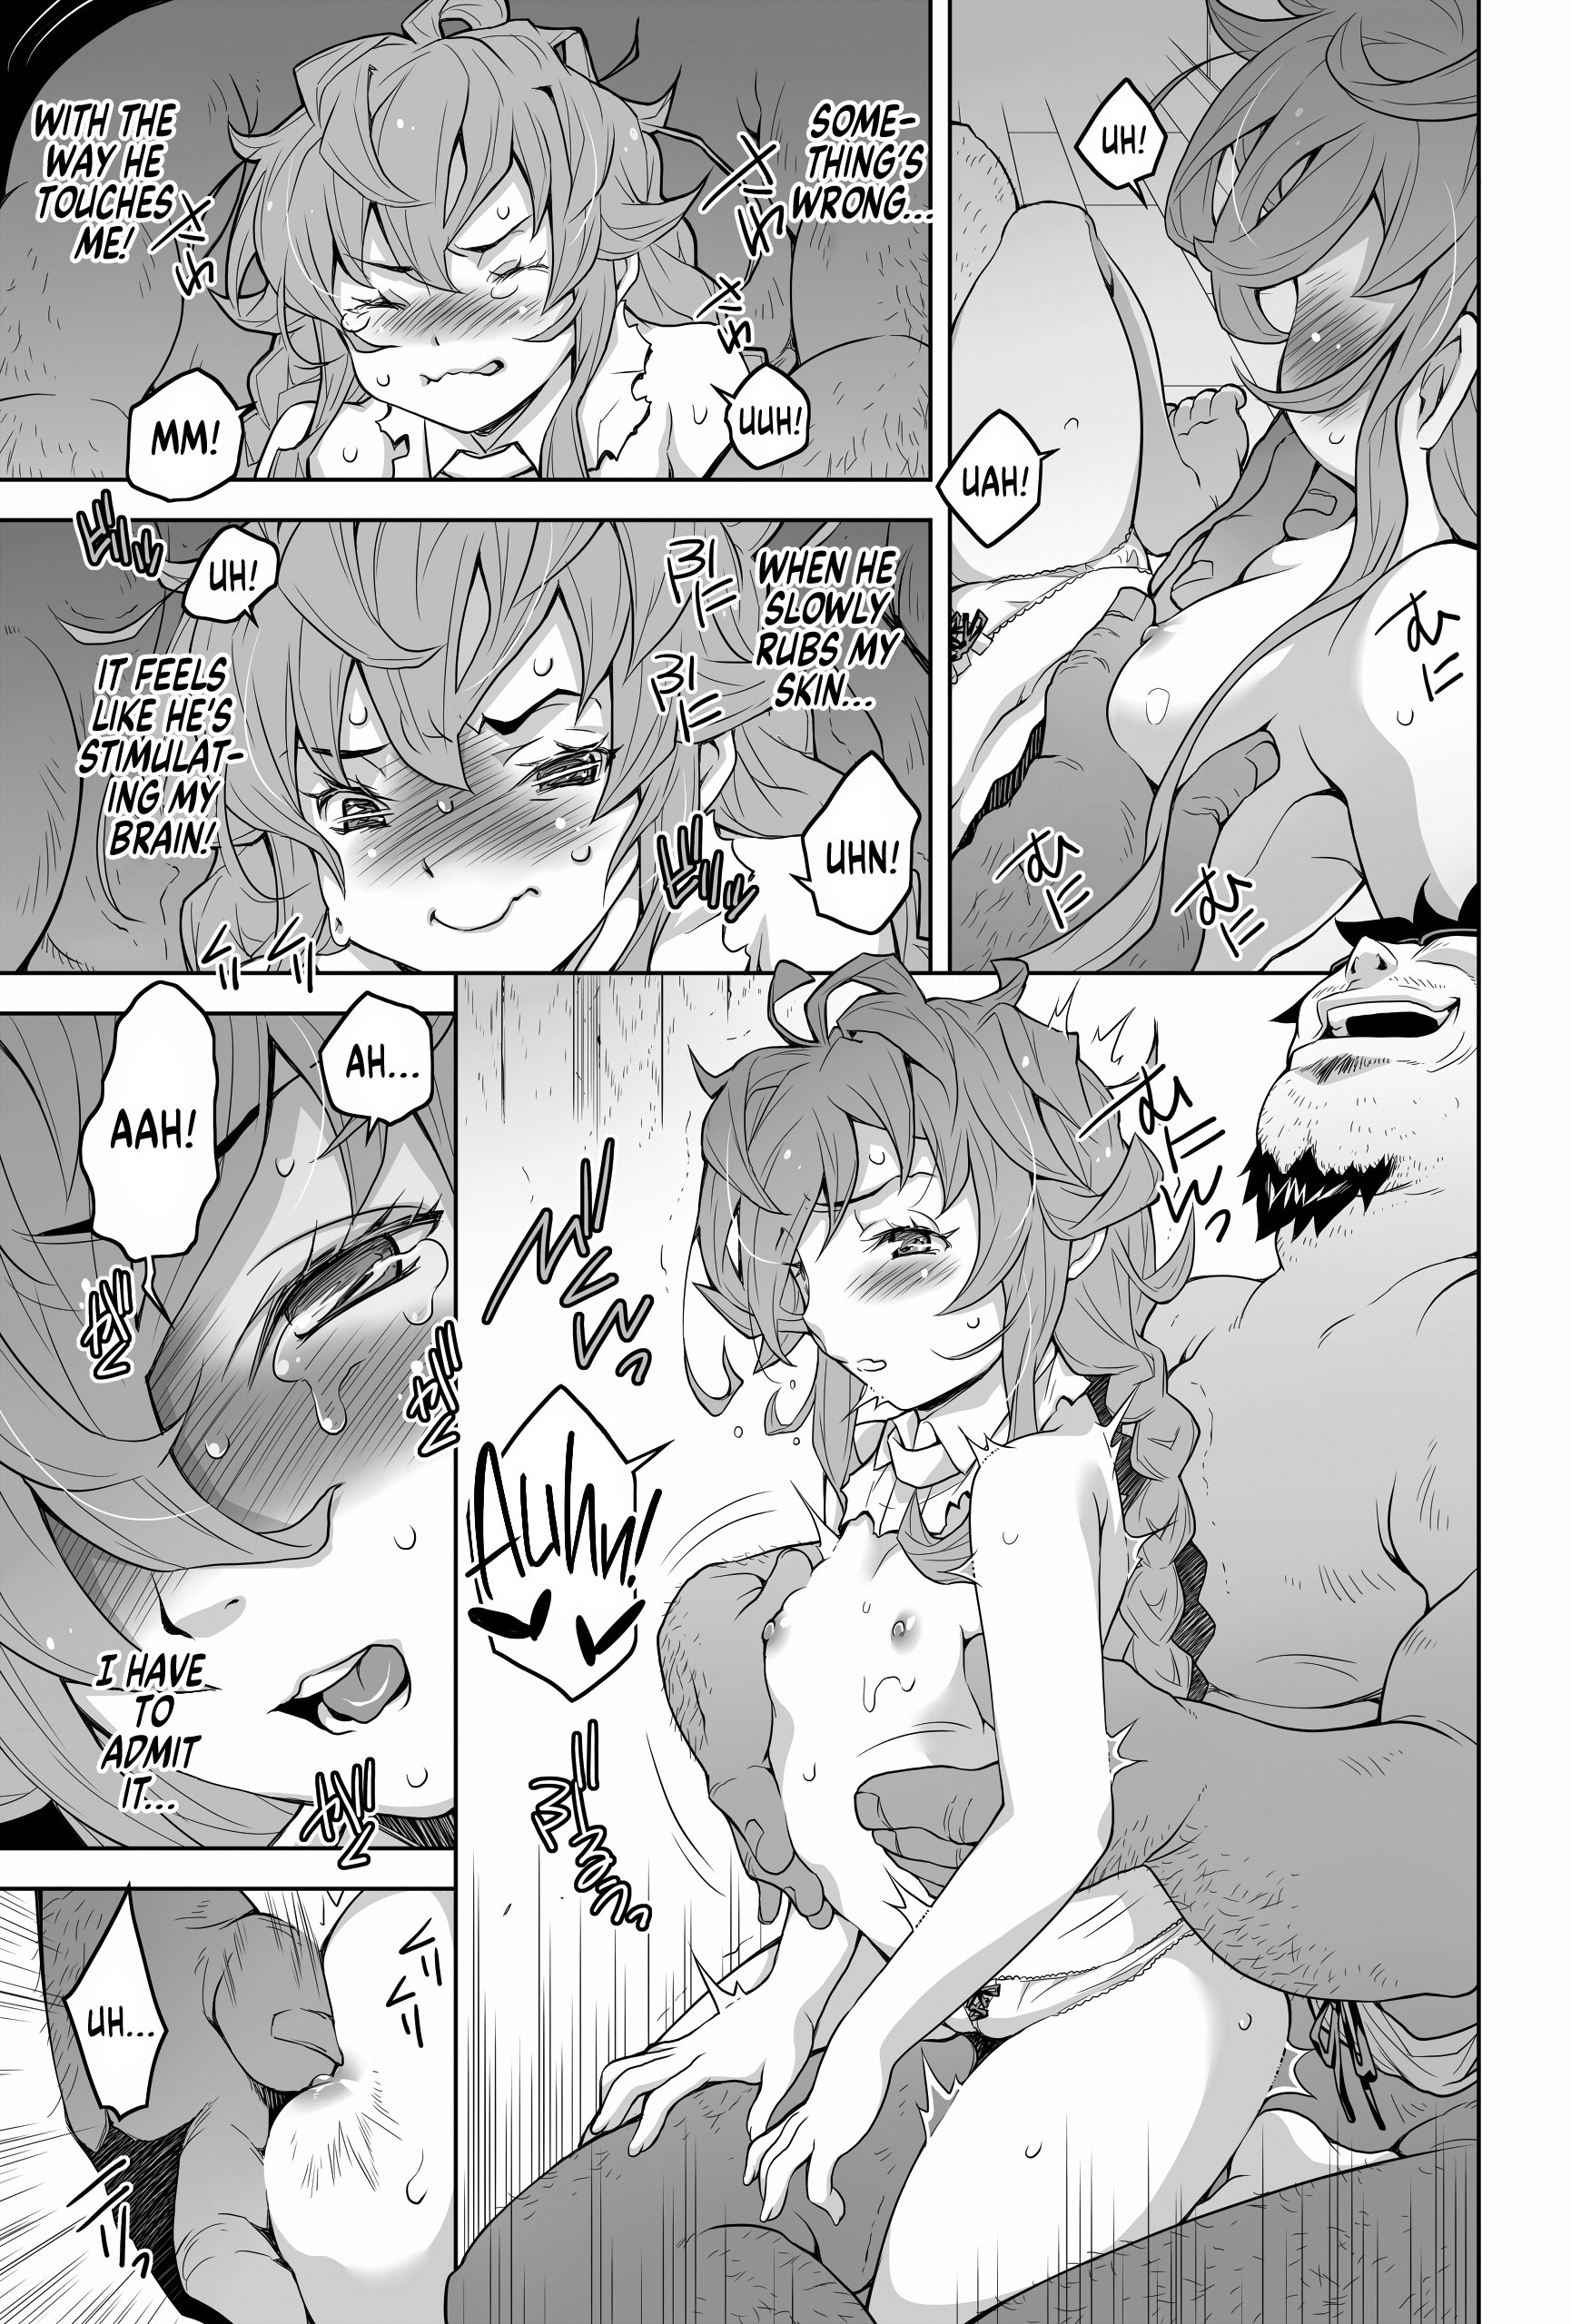 If A Parallel World Existed I'd Get Serious hentai manga picture 6